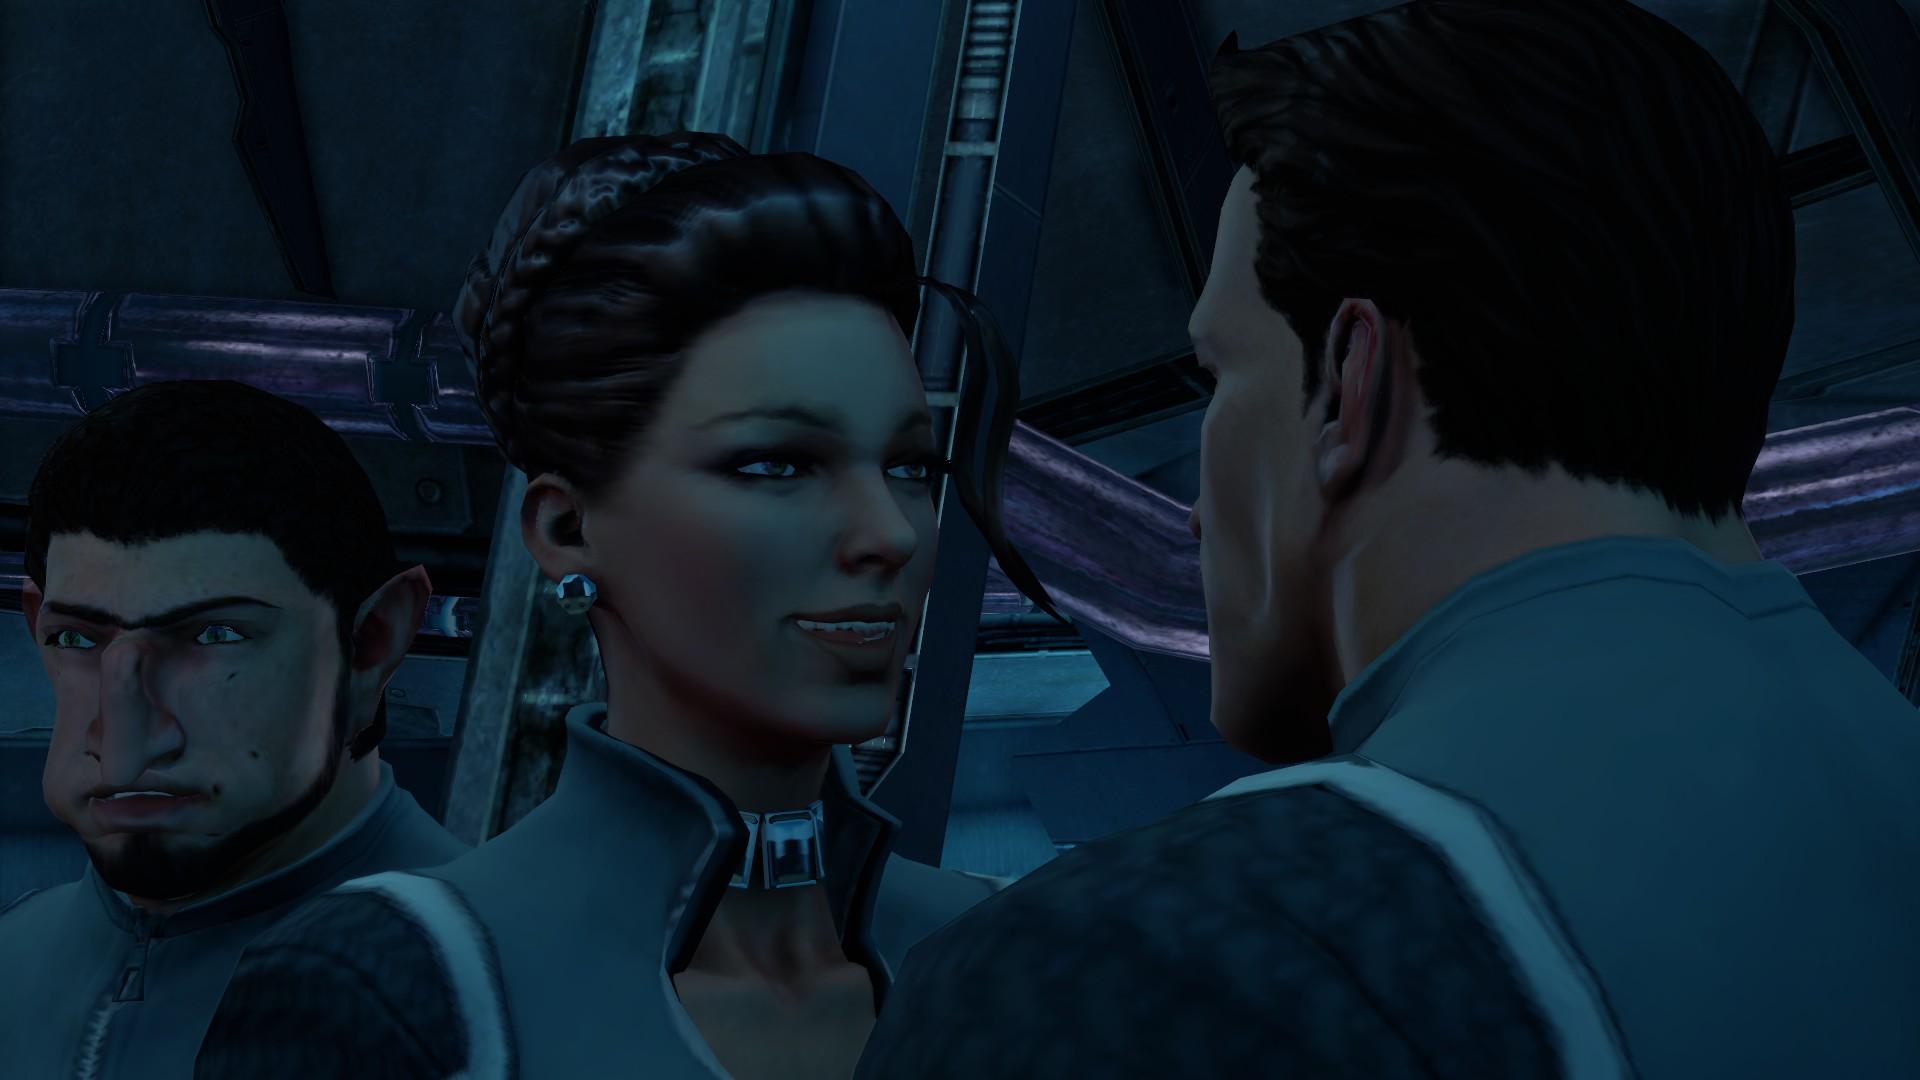 Tried to romance with Shaundi in Saints Row 4, but my friend keept.